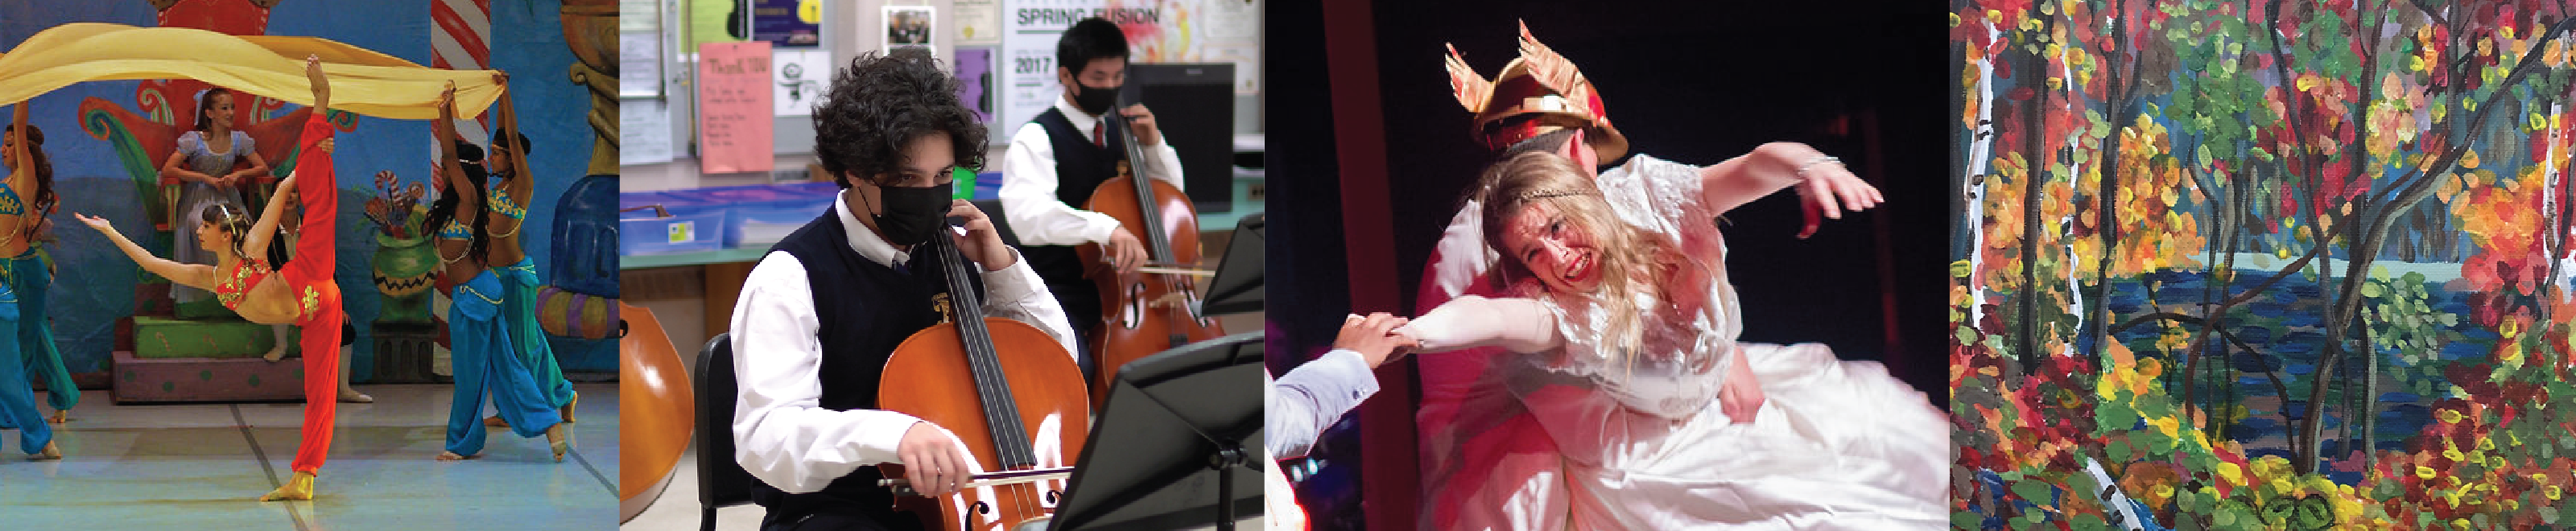 First image consists of 5 students dancing on stage.  Second image consists of 2 students playing strings instruments. Third image is 2 students acting on stage. Forth image is an abstract painting. 